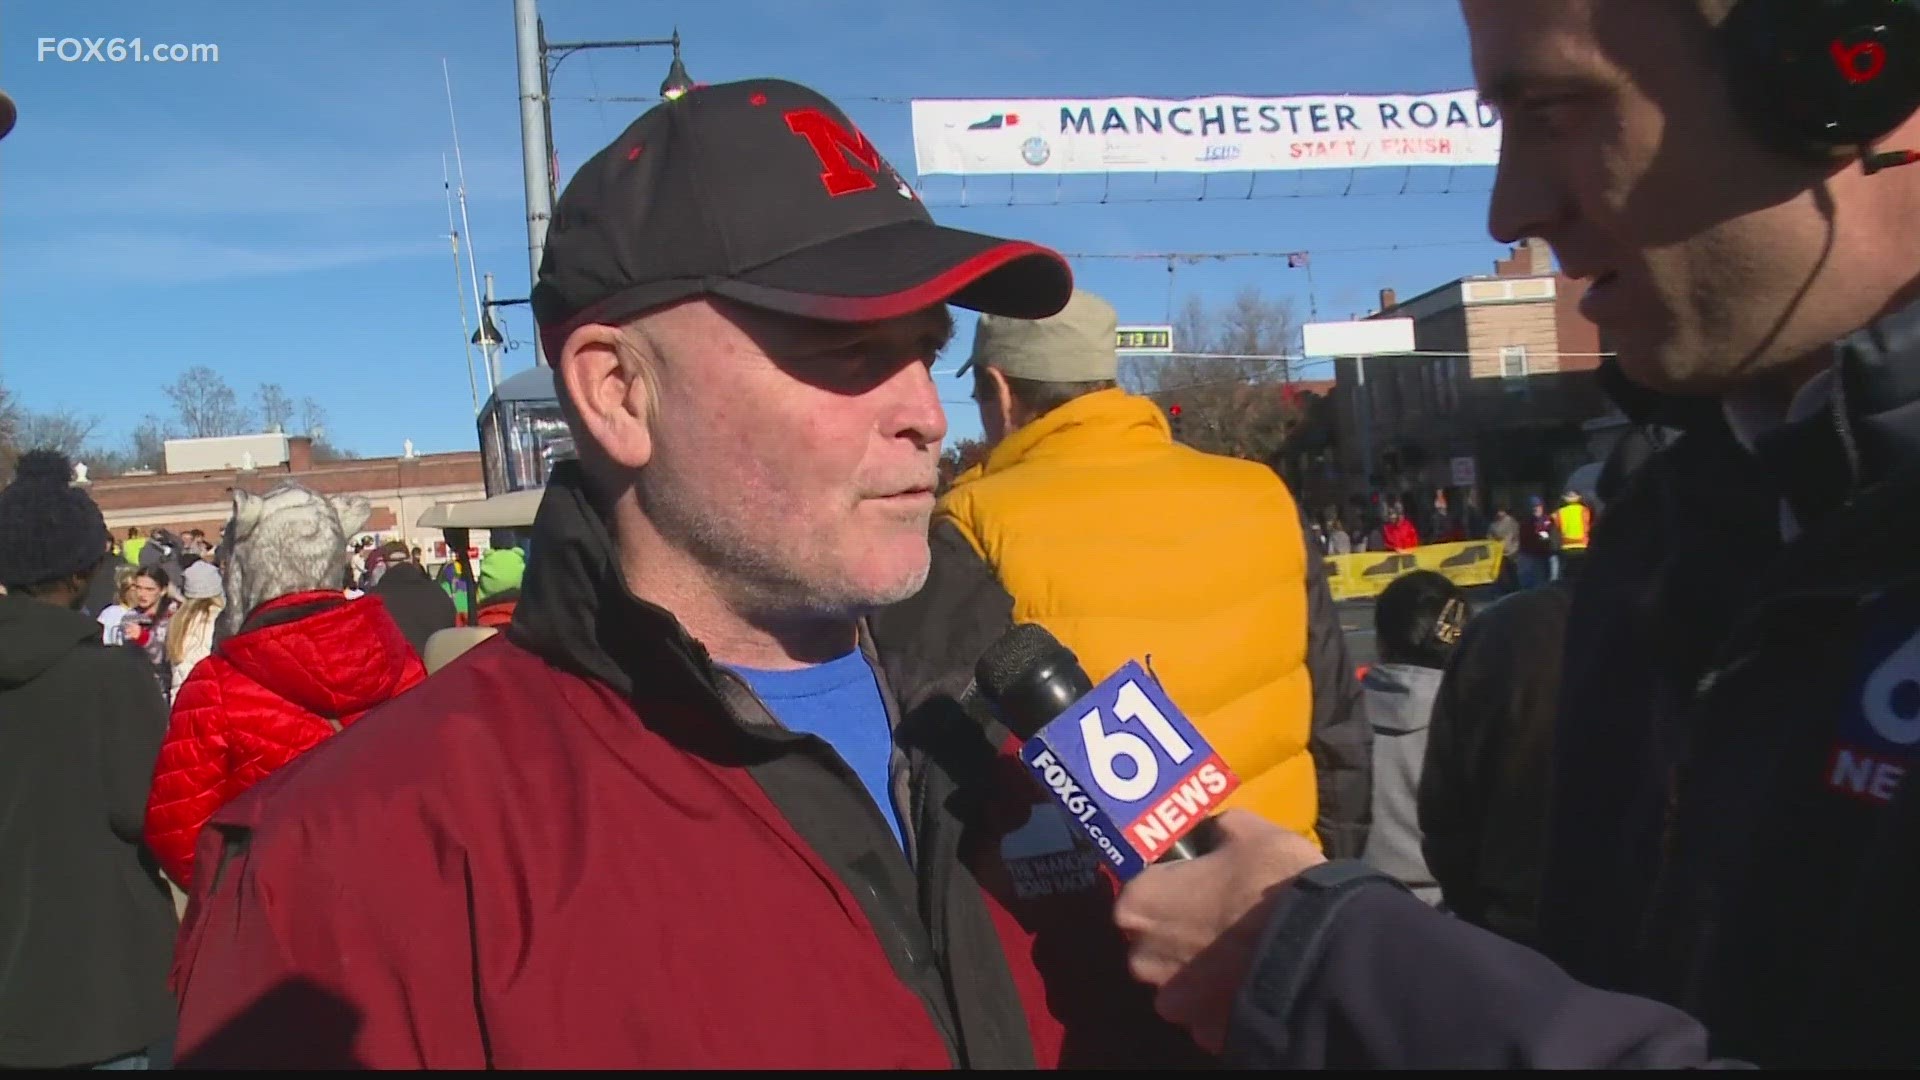 Thayer Redman is the new race director for the Manchester Road Race and discusses the impact the race has.